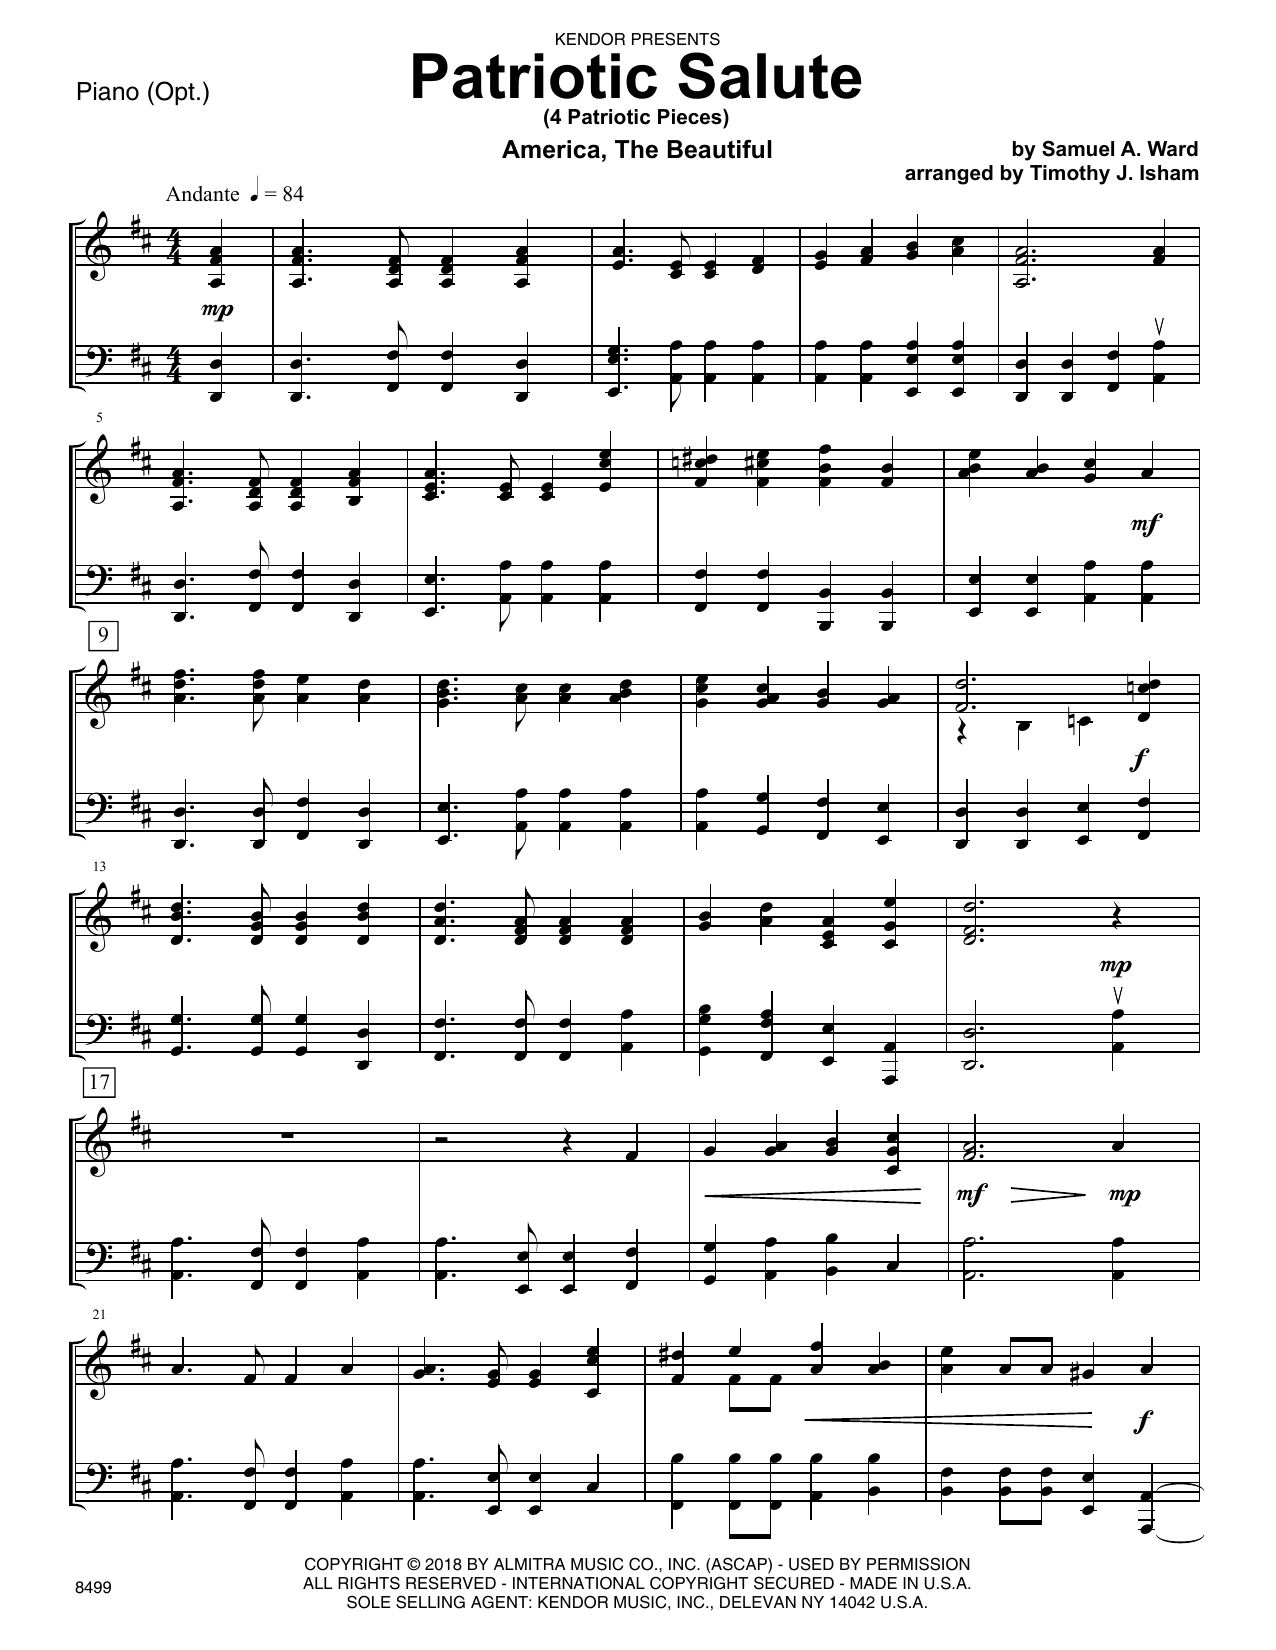 Timothy Isham Patriotic Salute (4 Patriotic Pieces) - Piano Accompaniment sheet music preview music notes and score for Orchestra including 6 page(s)